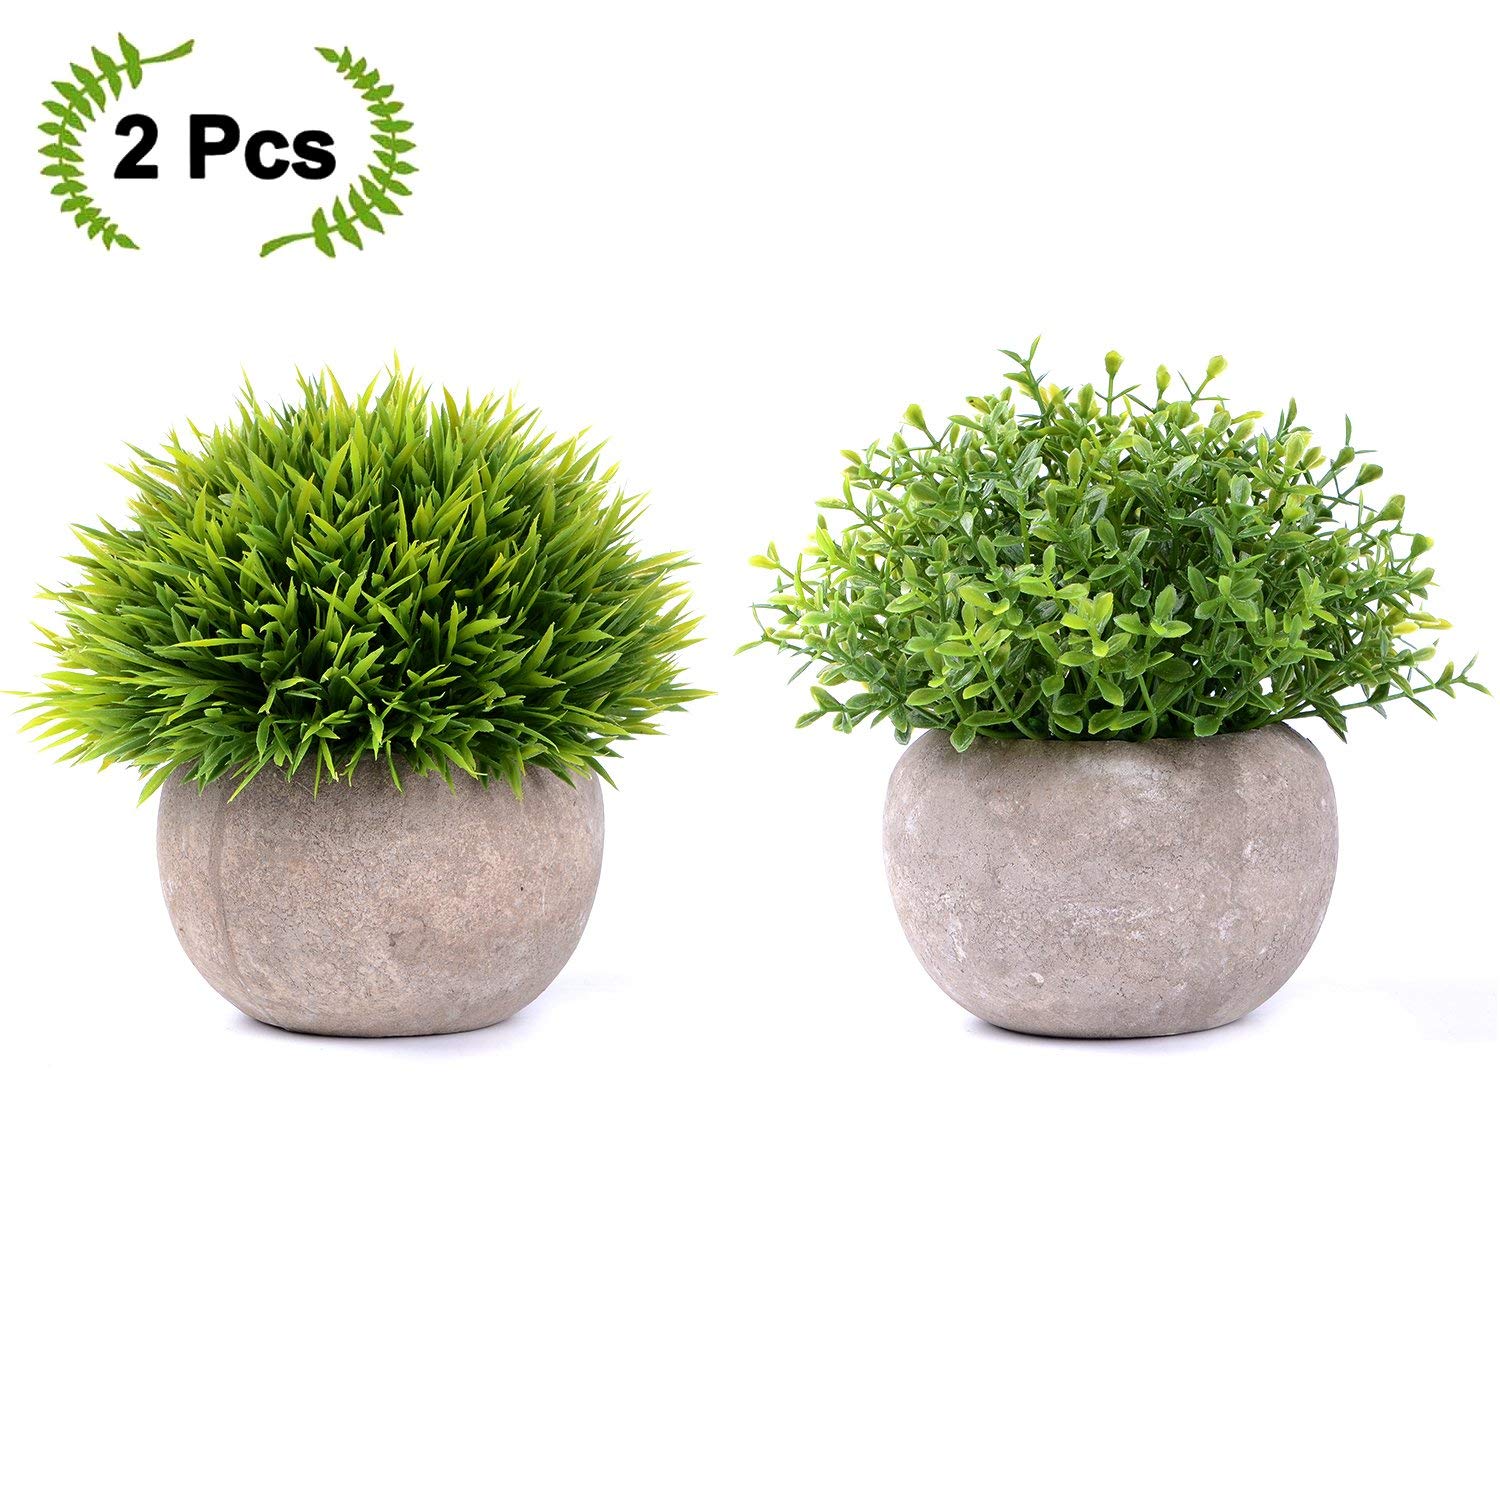 Face Plants in Black Pots for Bathroom Decor Office Decor WOODWORD Artificial Plants for Room Decor Potted Fake Plants for Home Decor